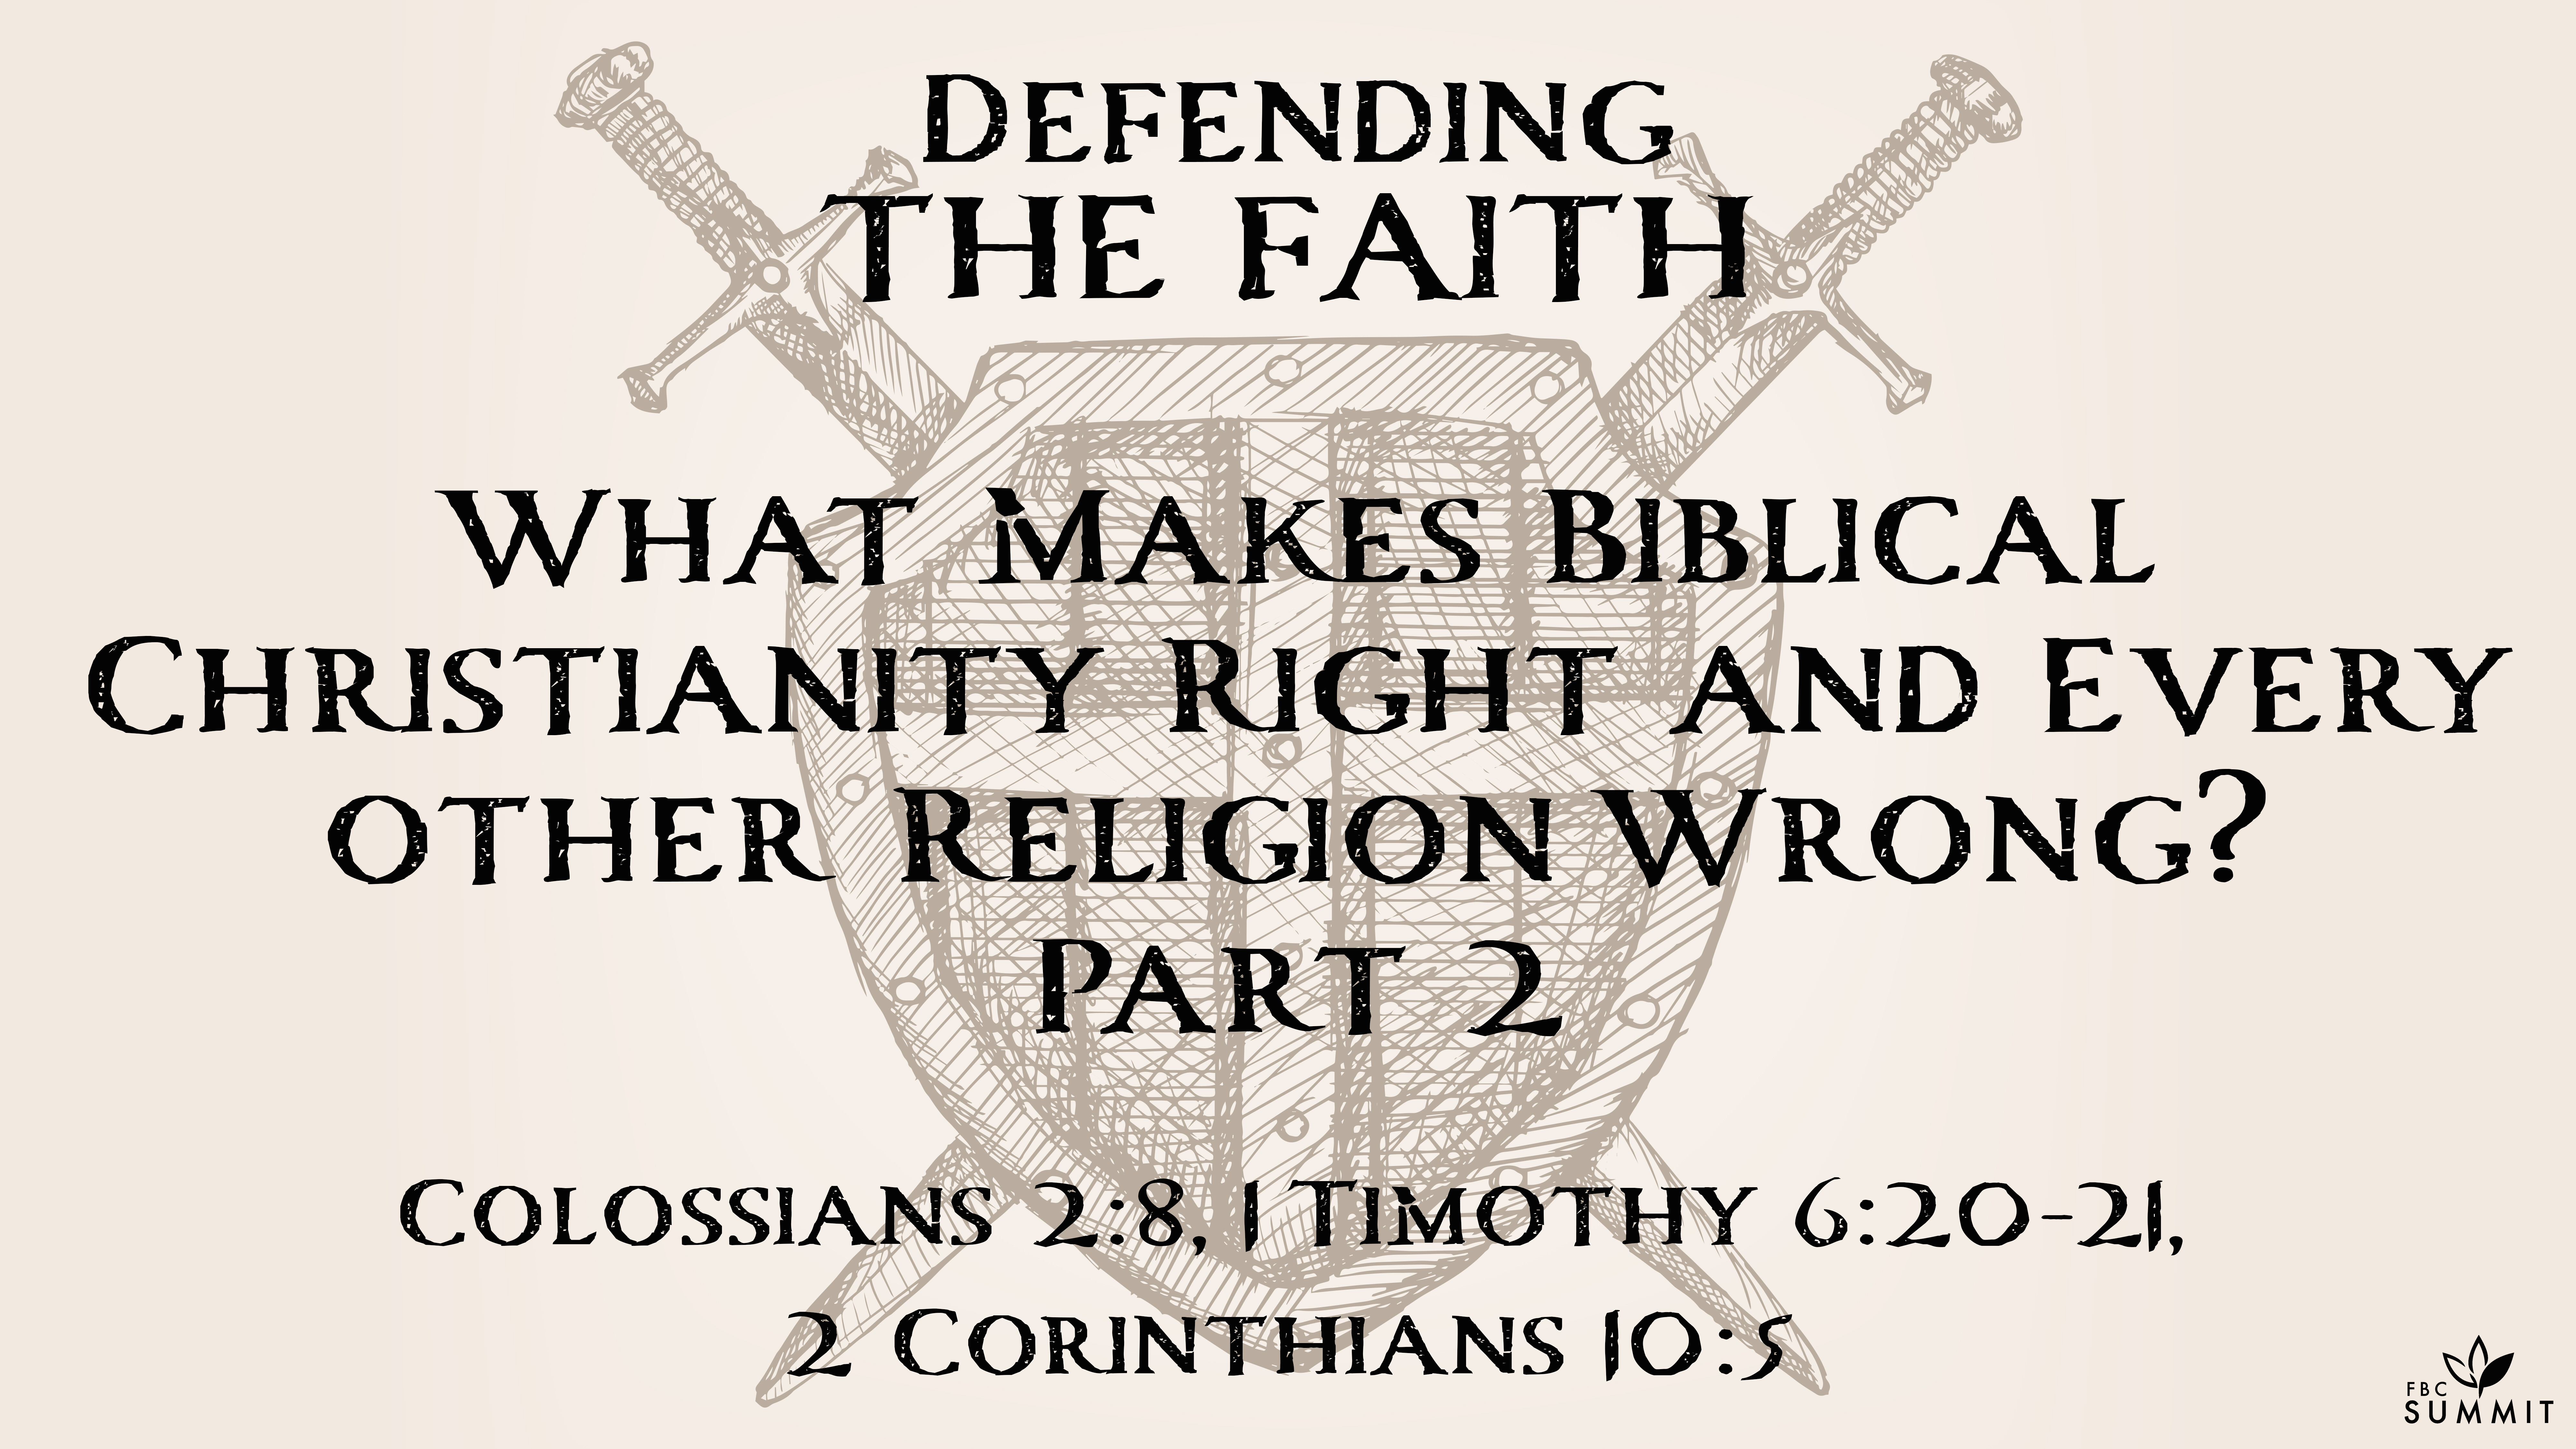 "What Makes Biblical Christianity Right and Every Other Religion Wrong?" Part II